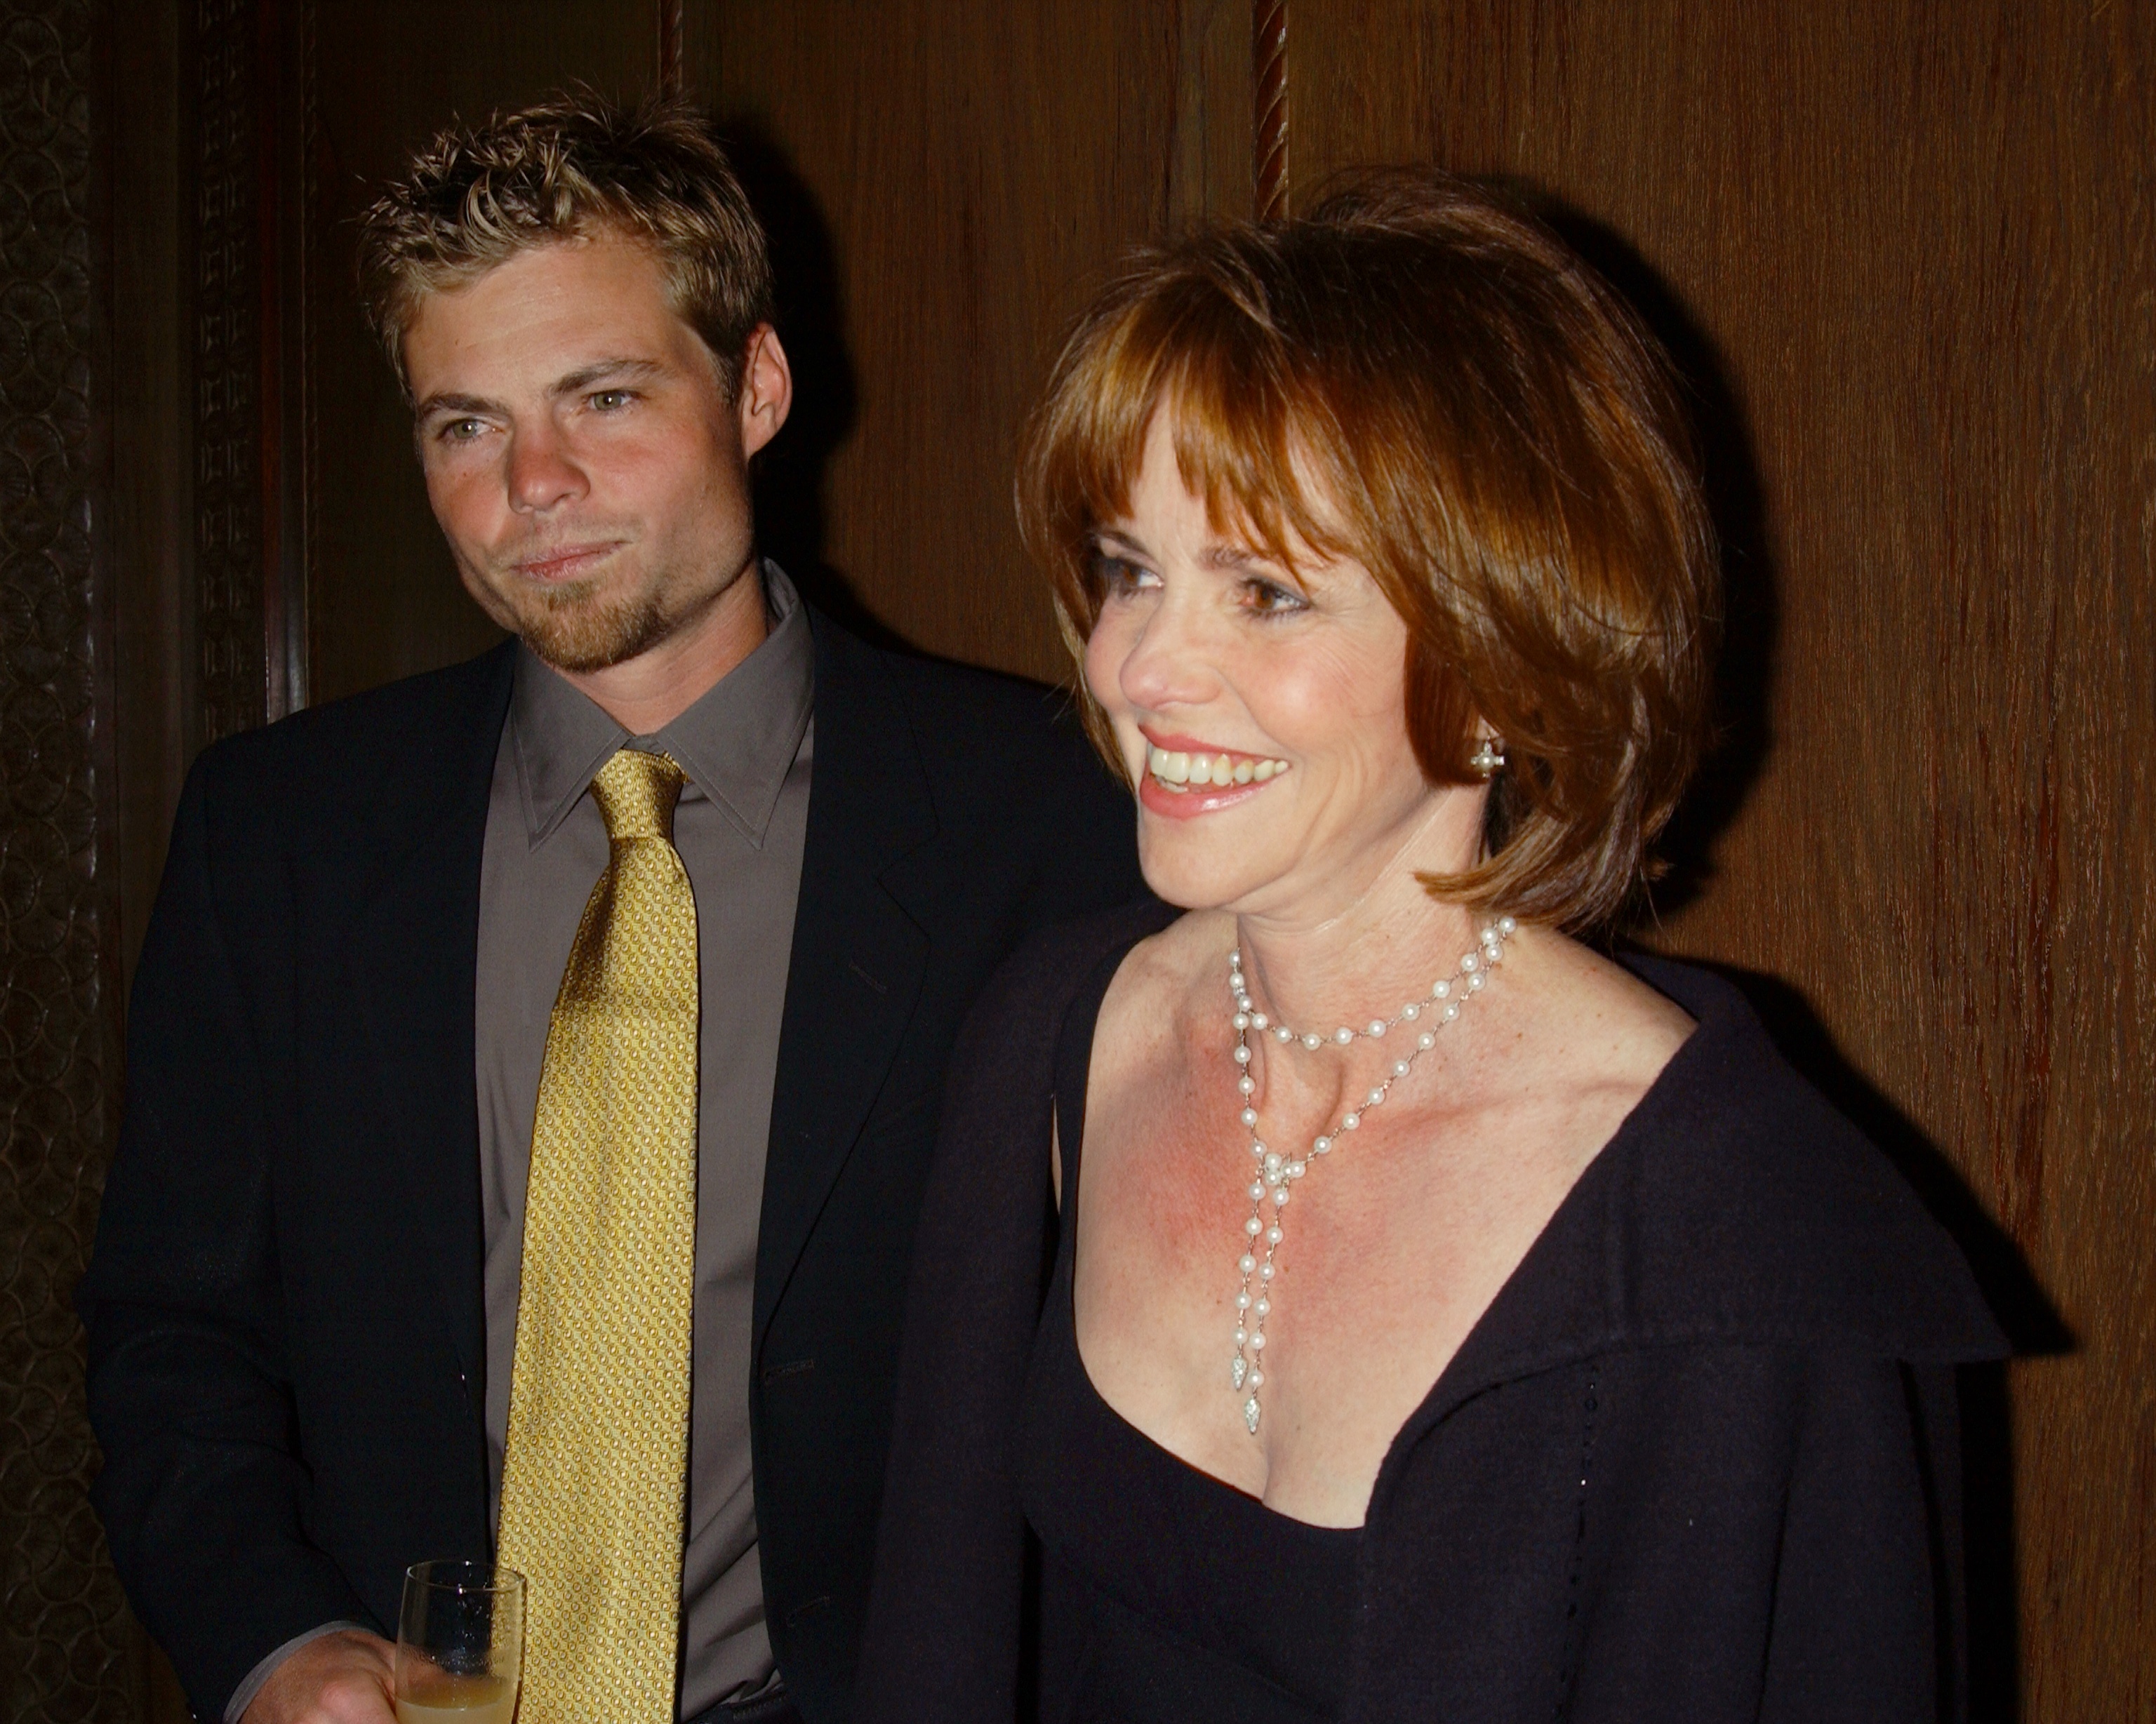 Sally Field and son Eli Craig at Cipriani 42nd Street for the 20th anniversary gala celebration of The Sundance Institute on April 23, 2002 | Source: Getty Images